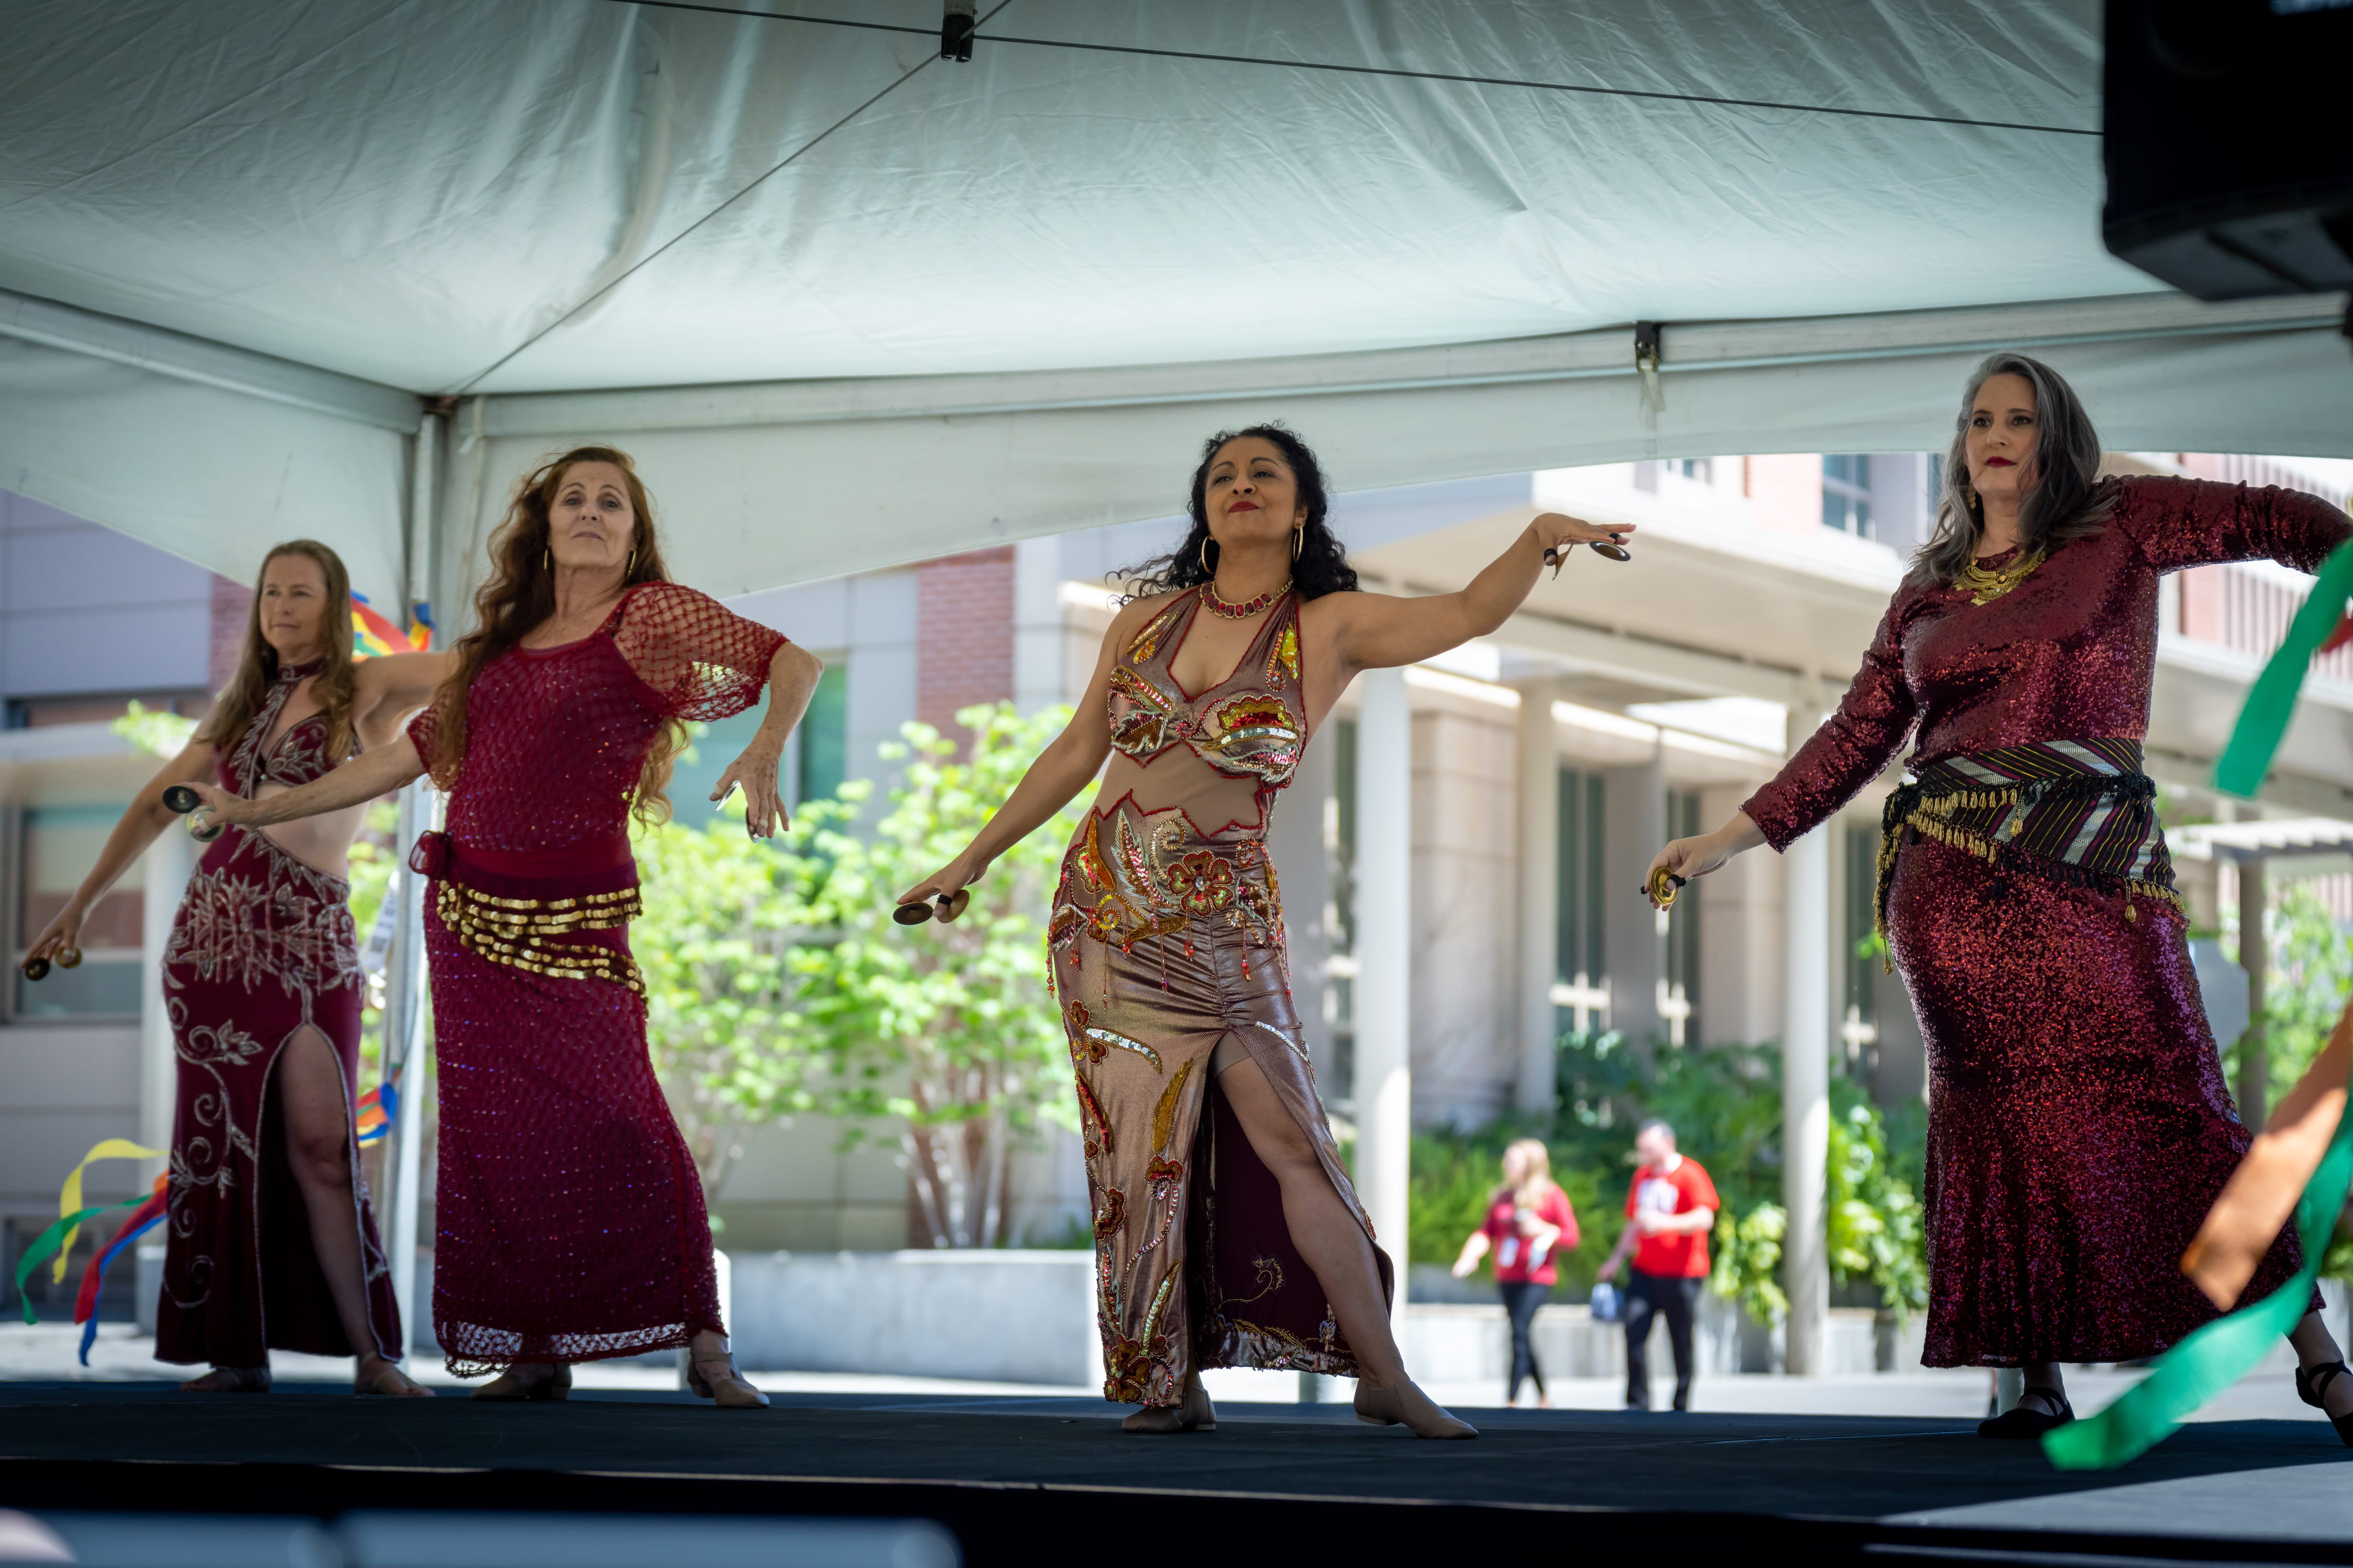 Dancers perform traditional middle eastern belly dancing.